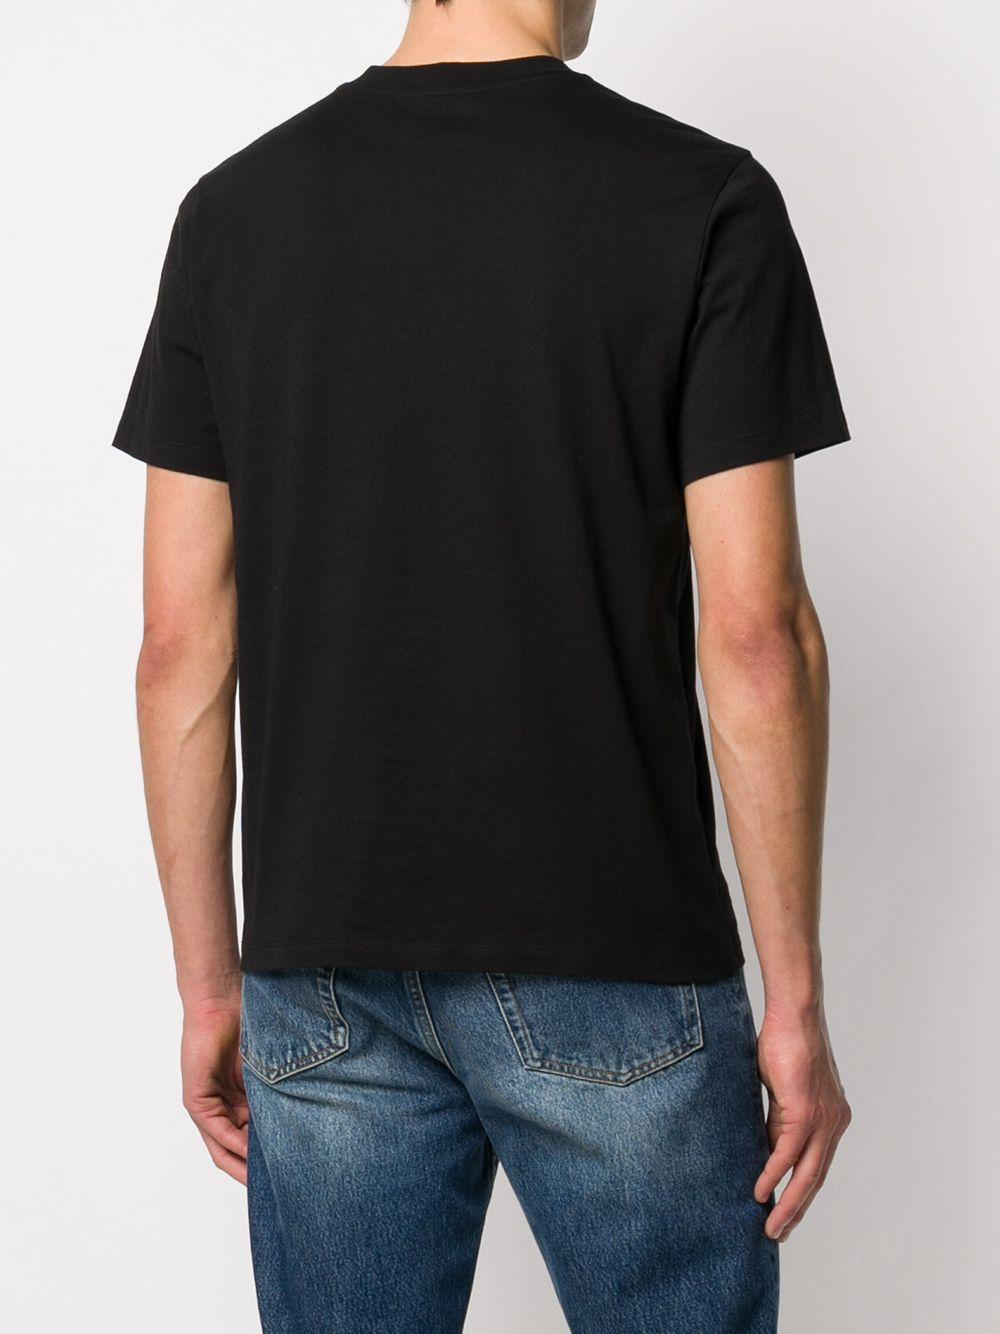 Sandro Cotton Embroidered Logo T-shirt in Black for Men - Save 23% - Lyst